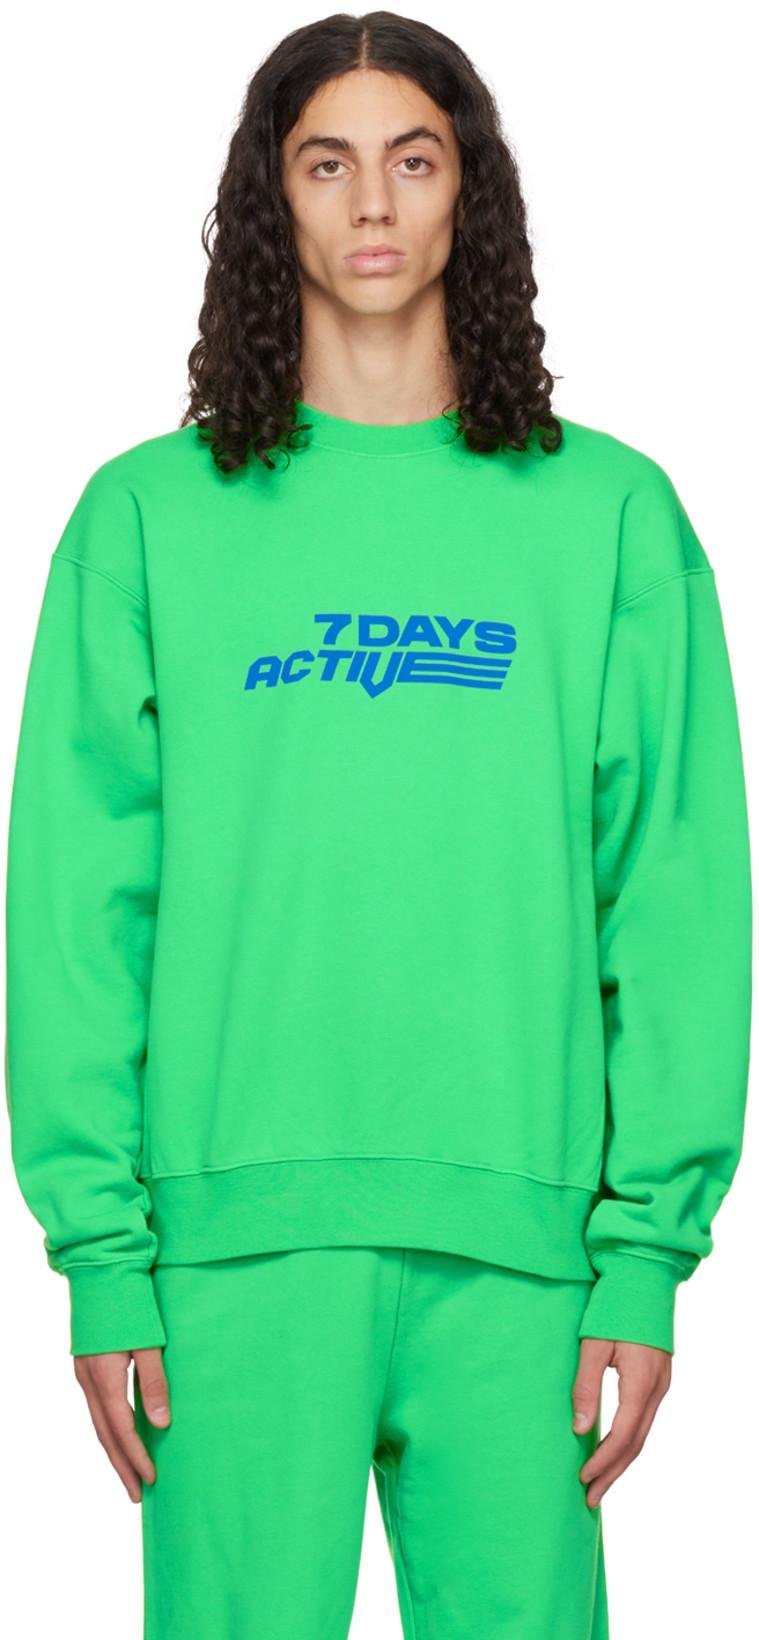 Green Monday Sweatshirt by 7 DAYS ACTIVE